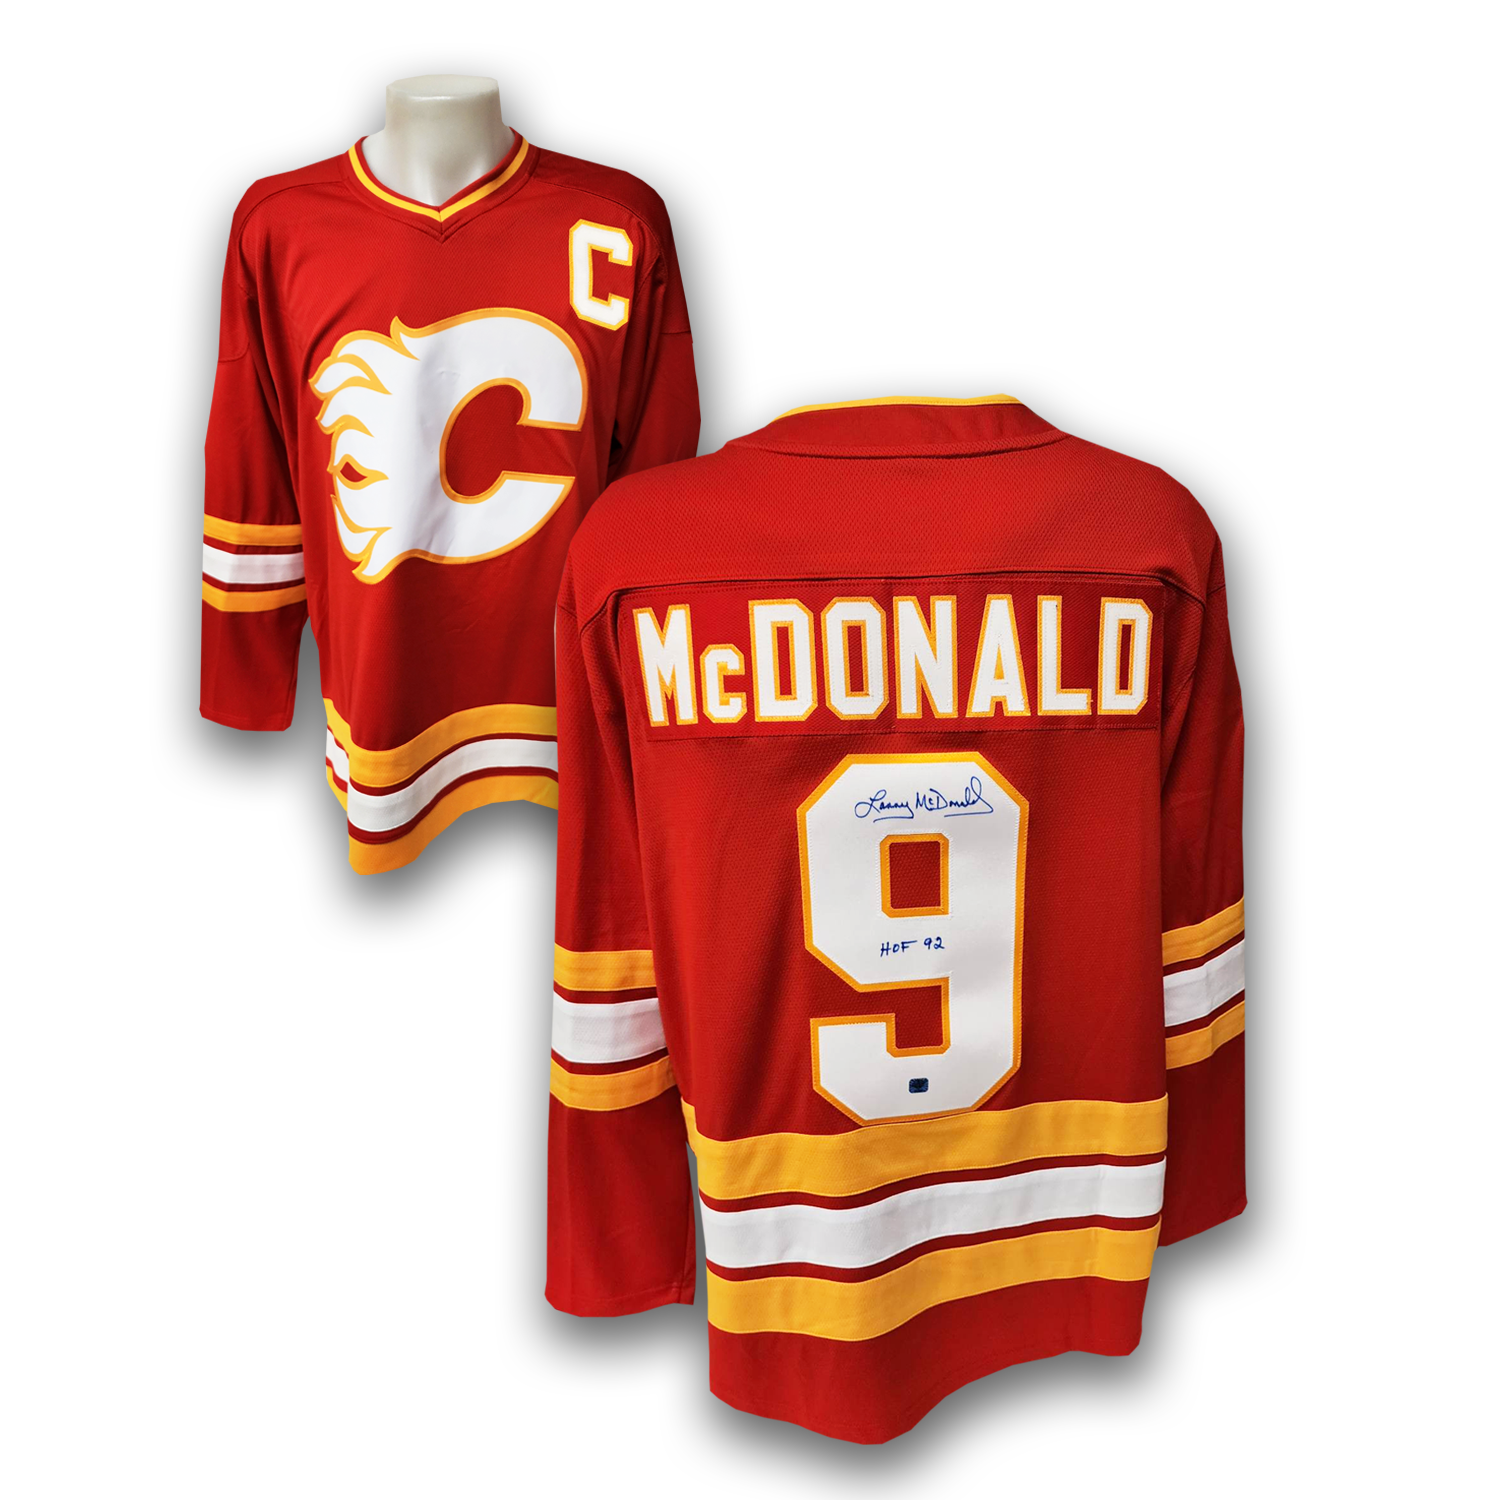 Sean Monahan Calgary Flames Autographed adidas Authentic Jersey